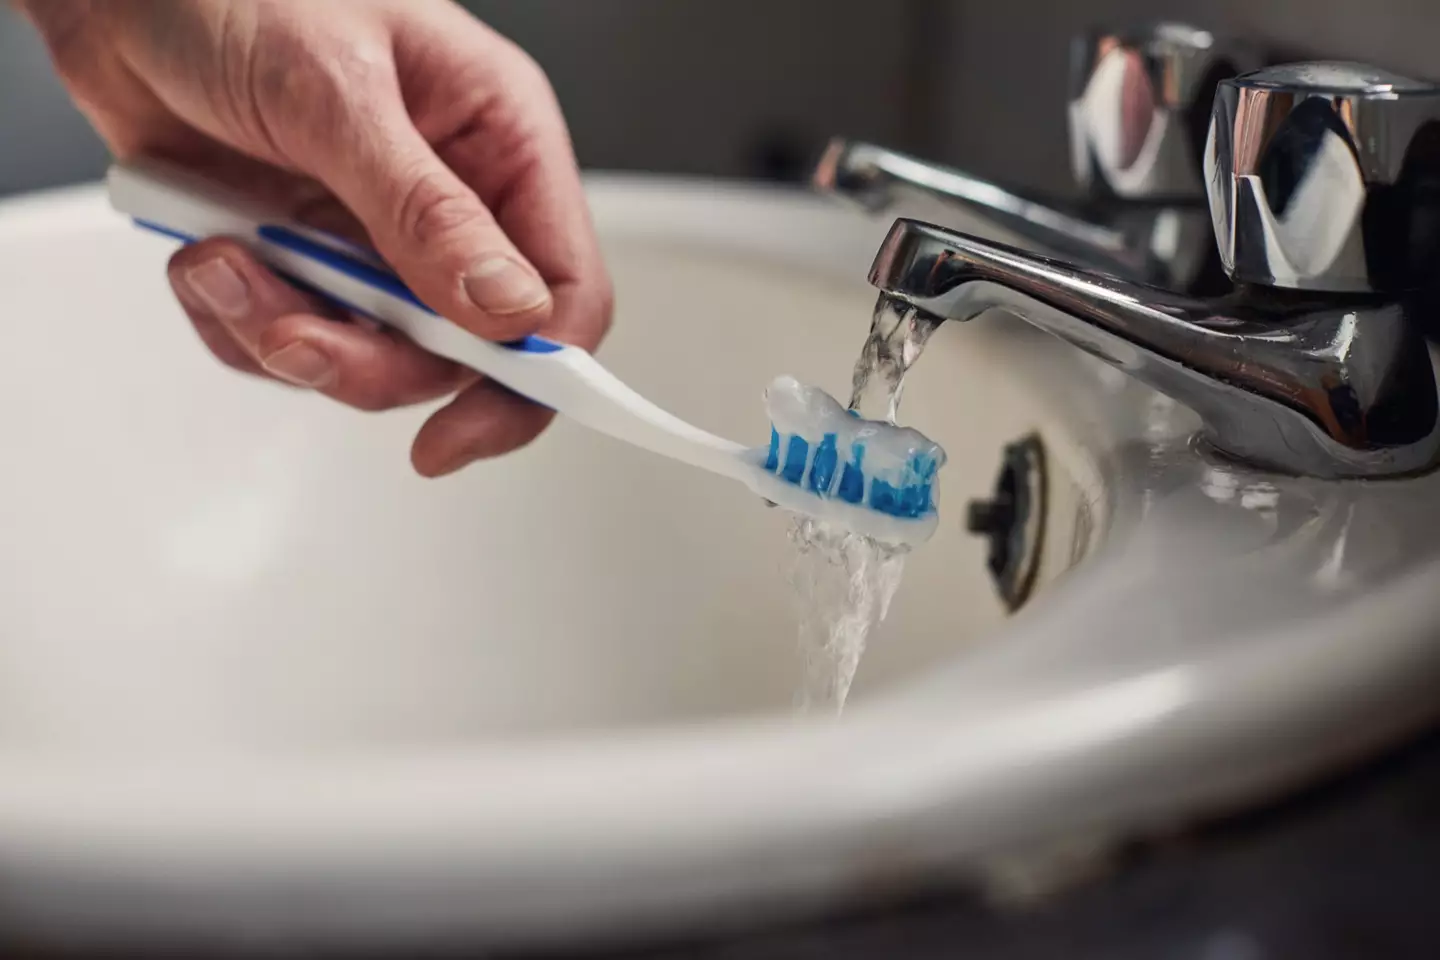 A woman admitted she had to force her boyfriend to brush his teeth.